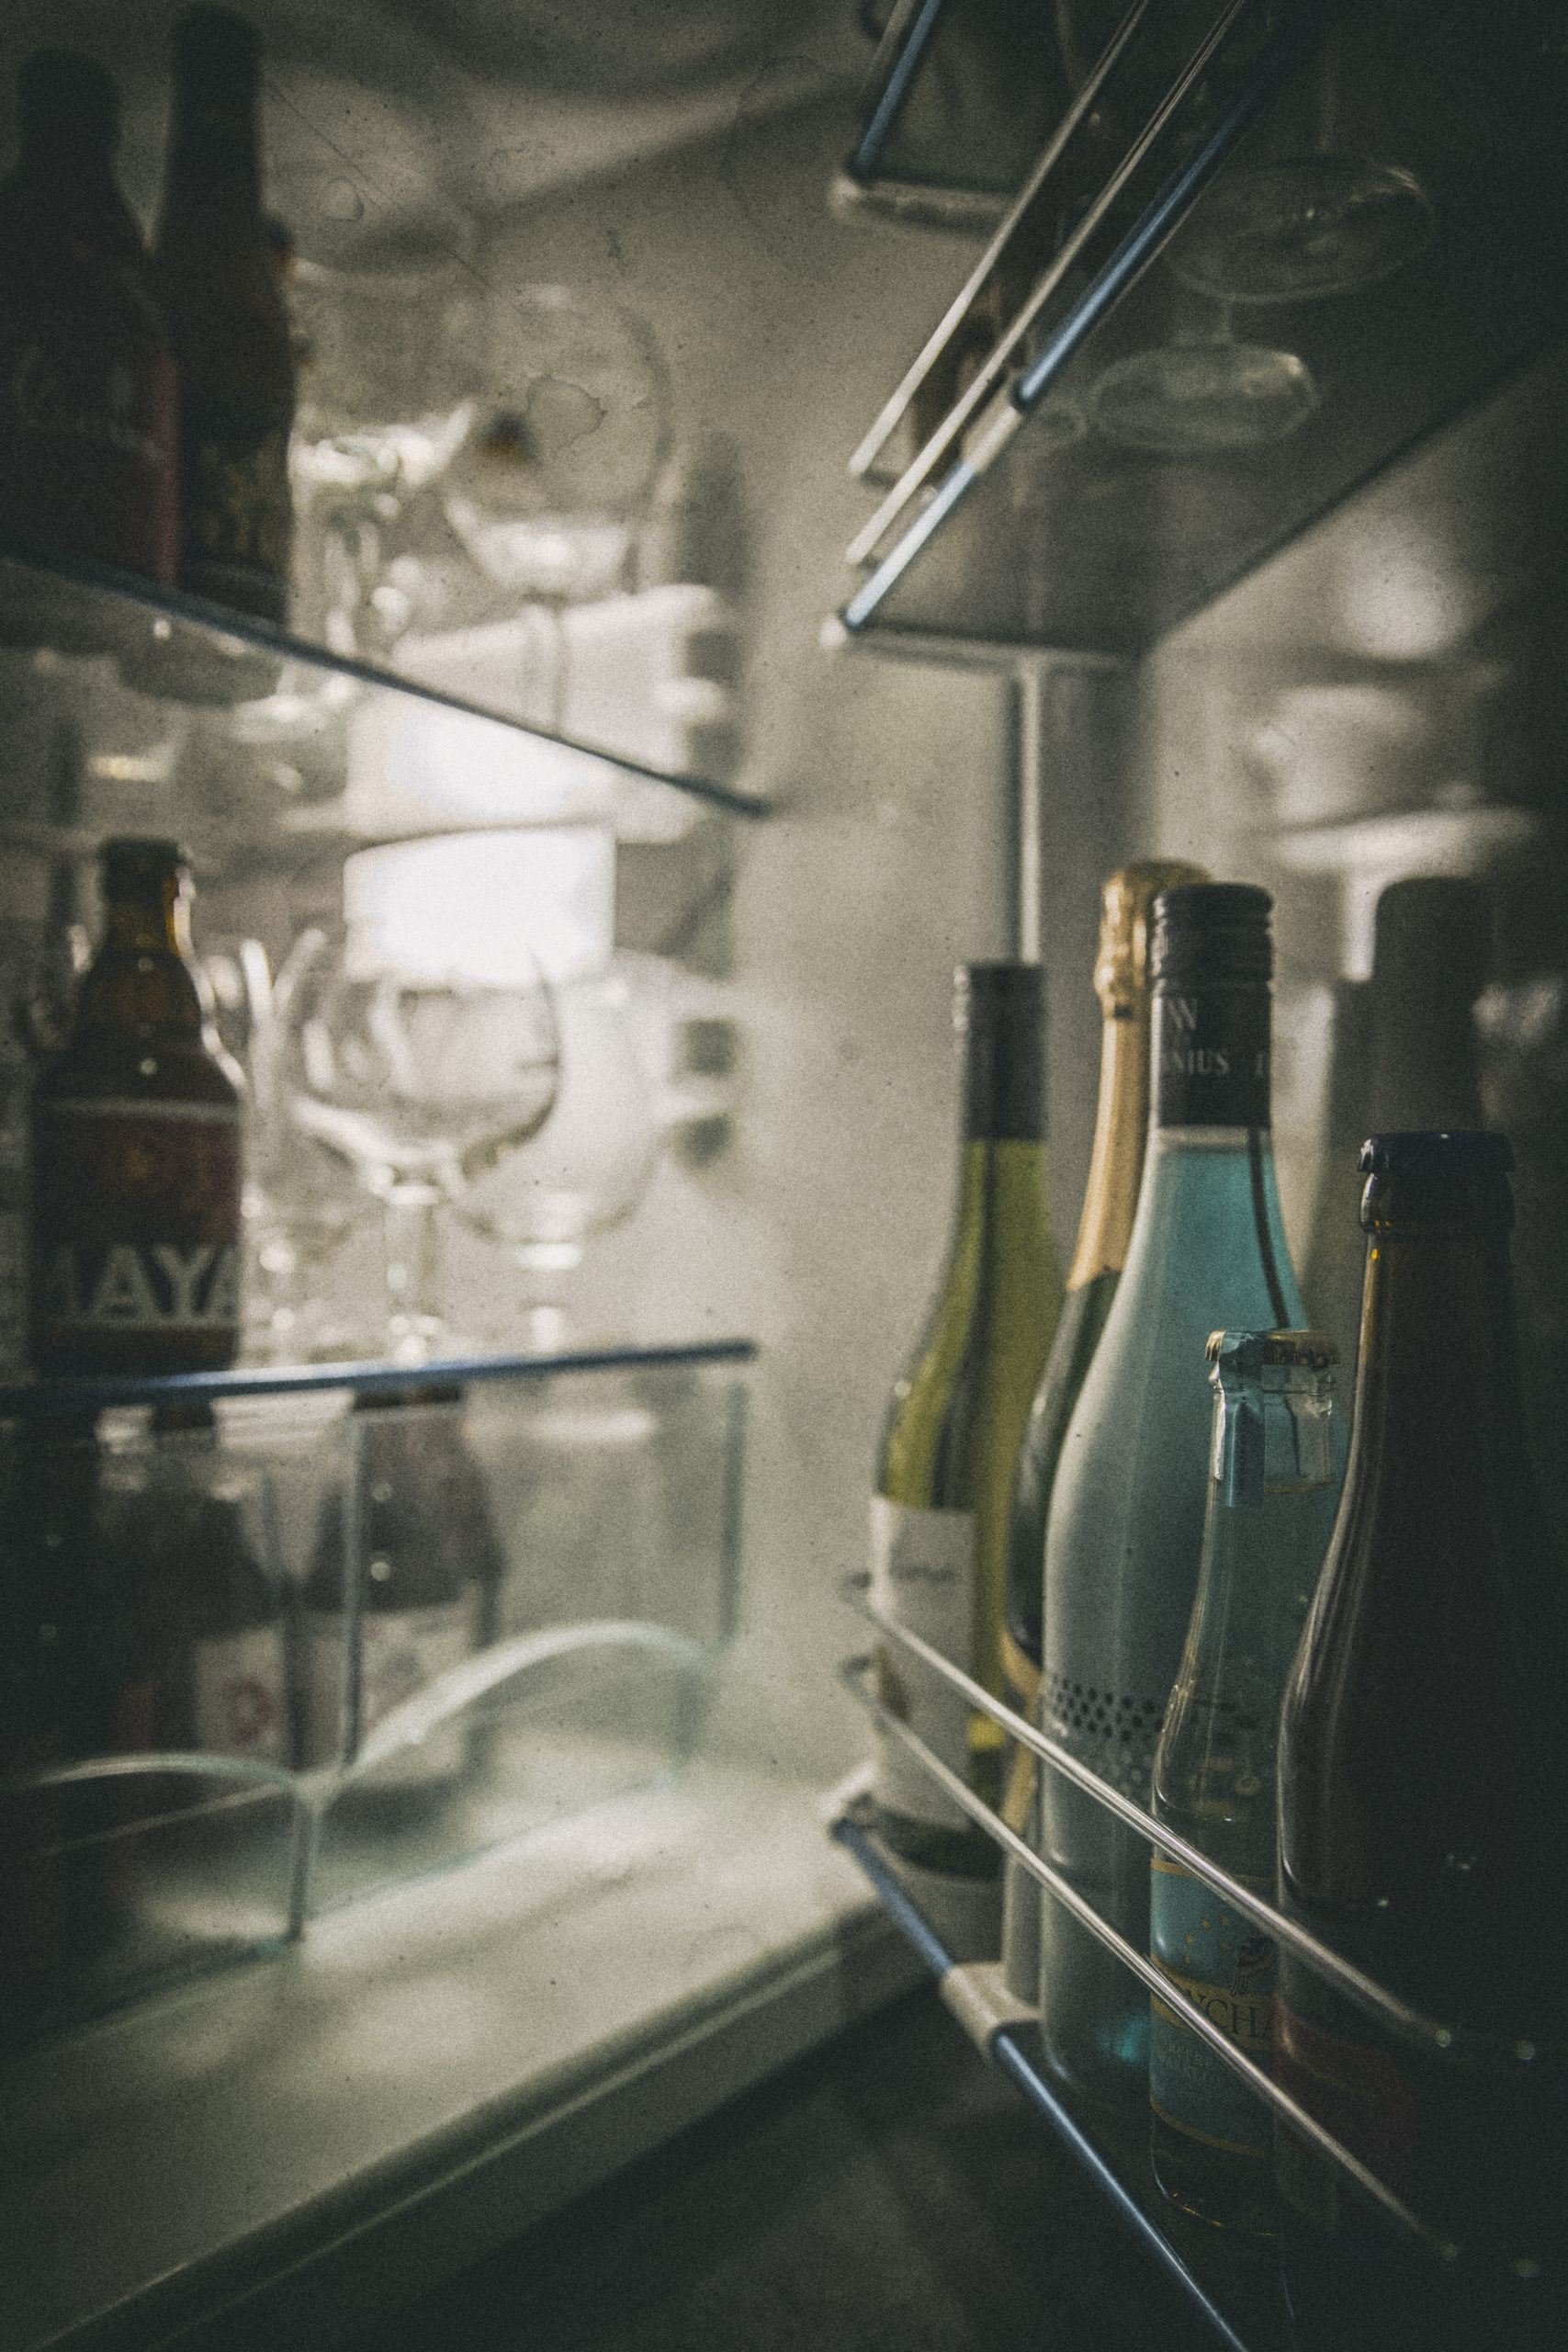 image of drinks in a fridge